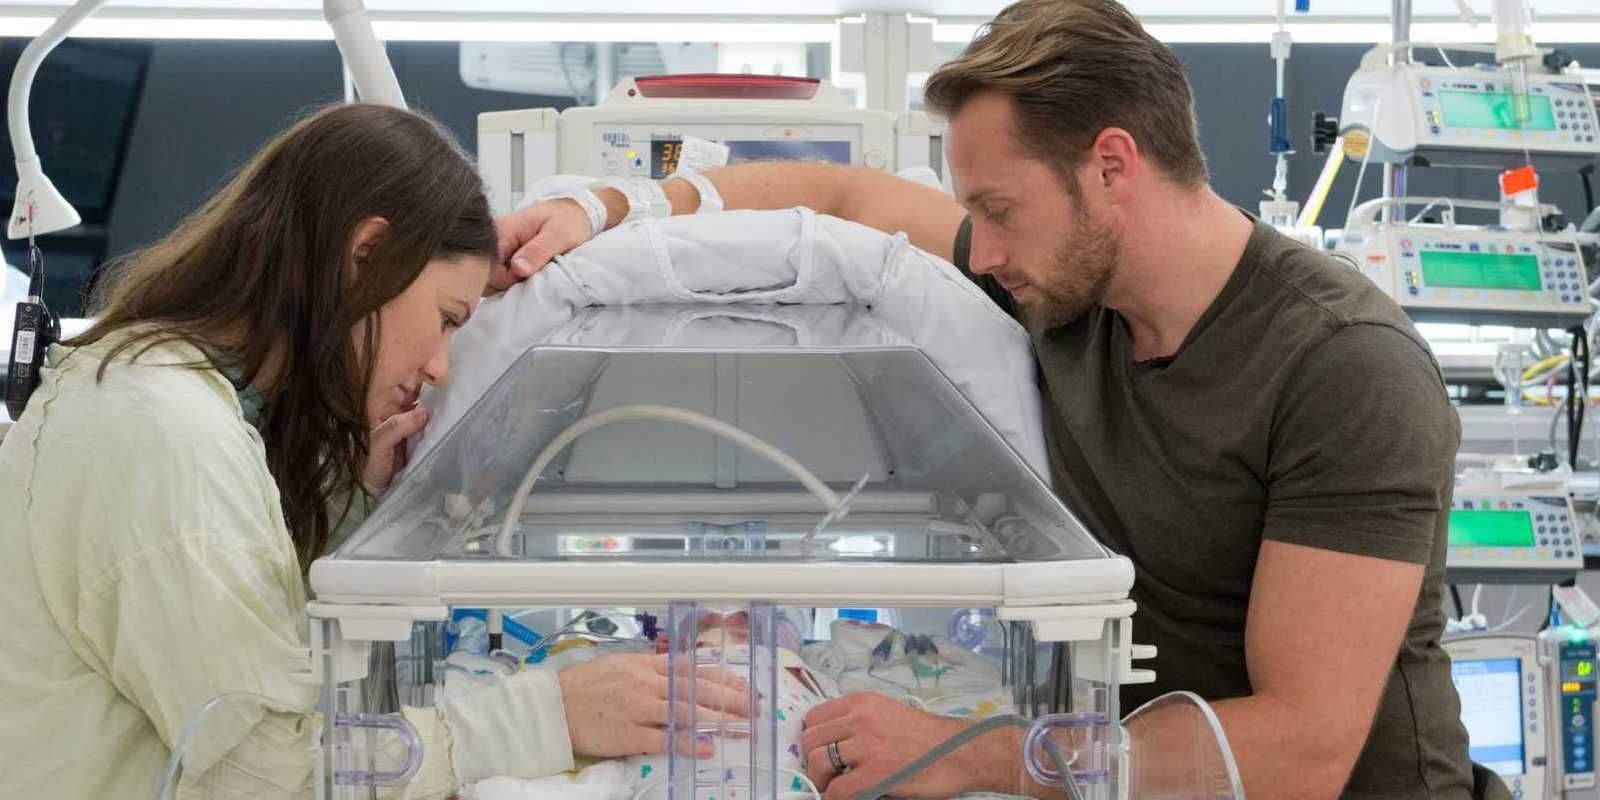 Adam and Danielle Busby in the hospital looking down at one of their quints in an incubator.